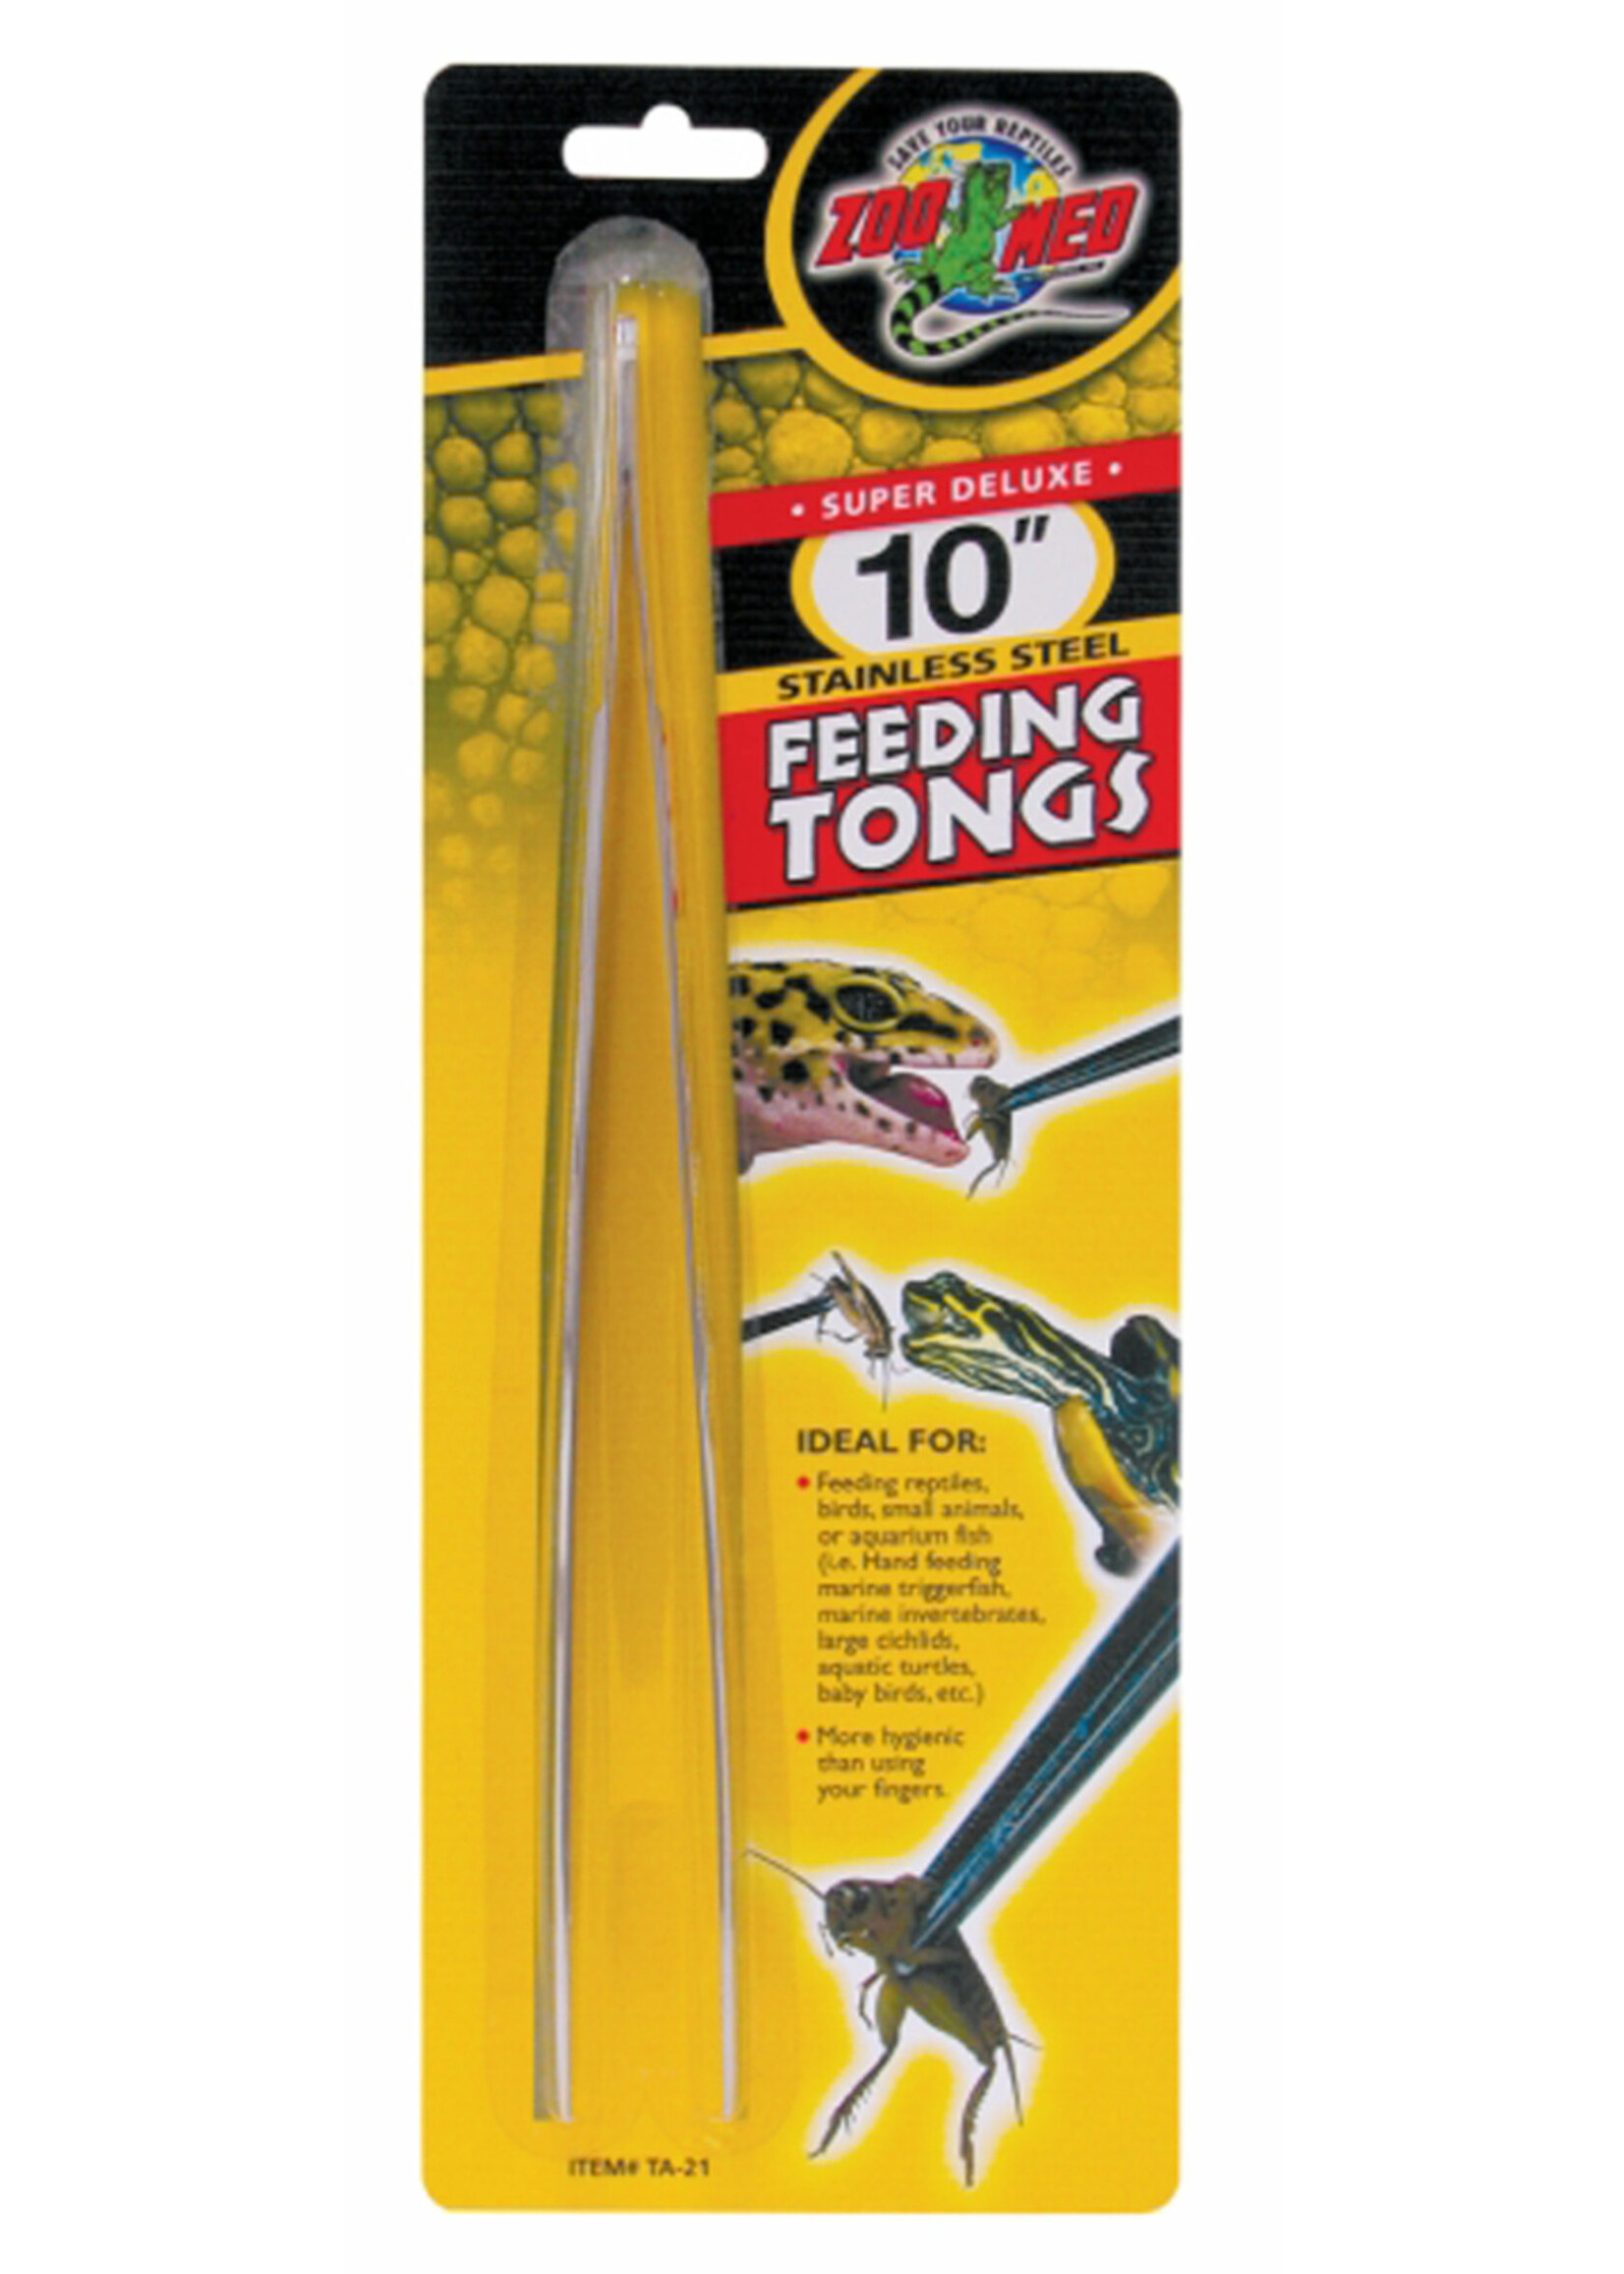 Zoo Med STAINLESS STEEL FEEDING TONG 10"